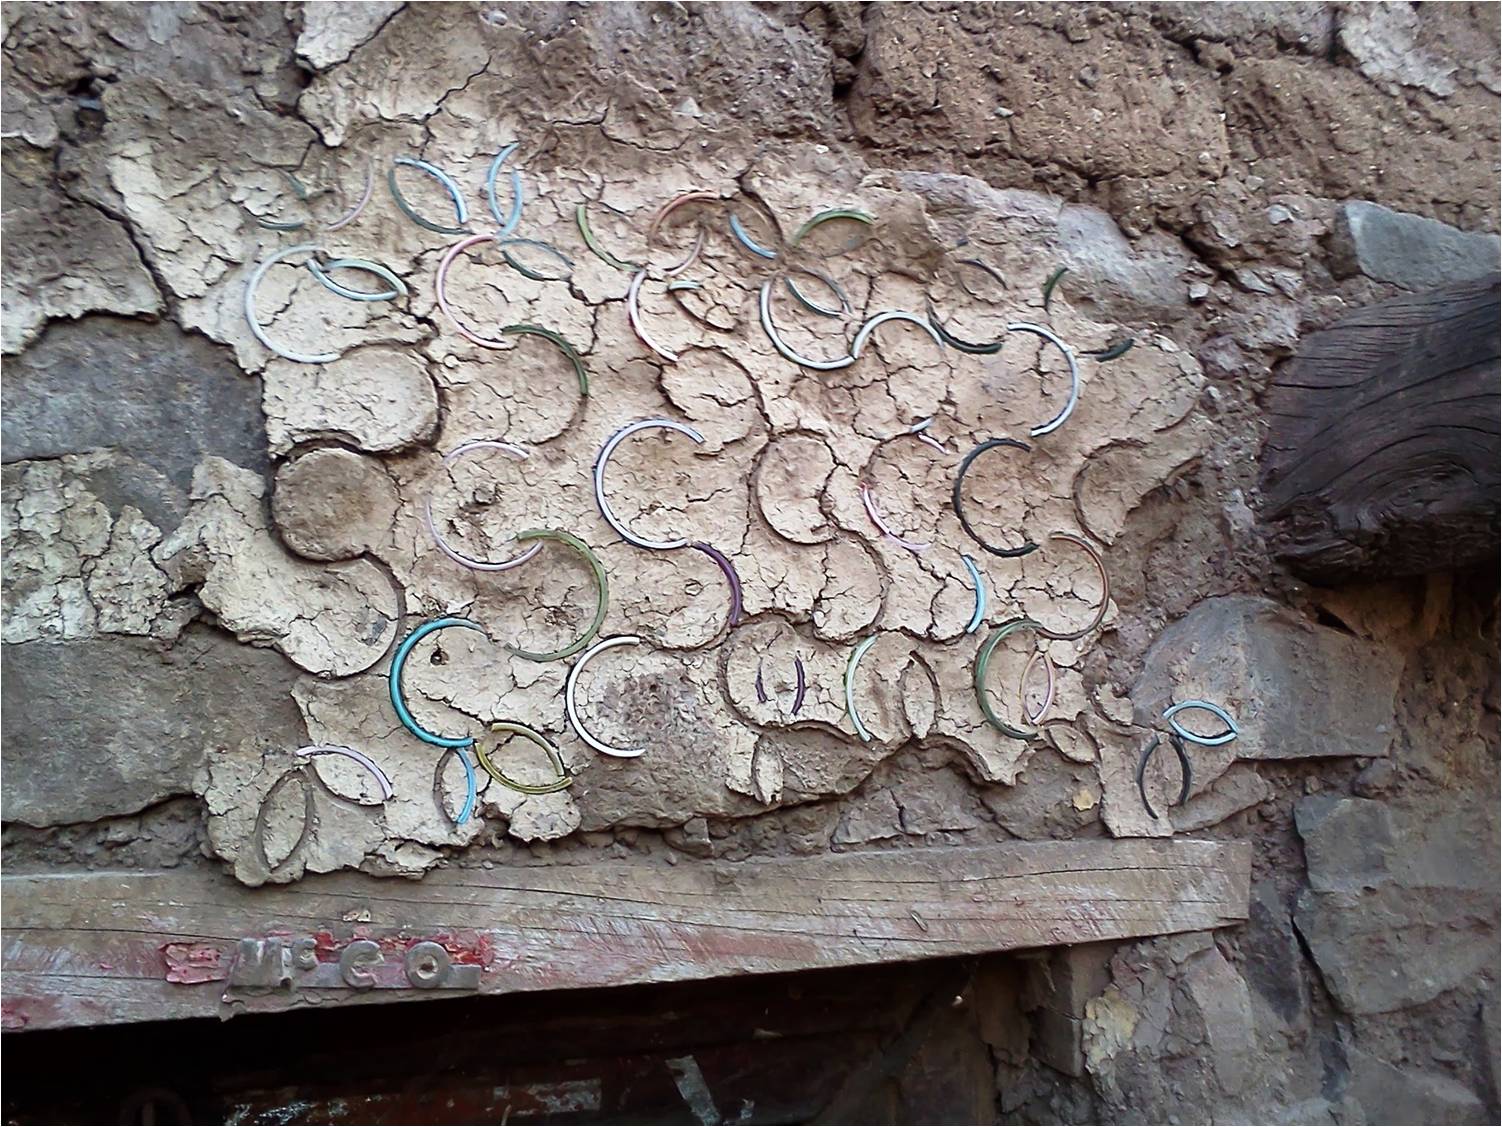 Bangles ingrained into the plaster of the lady's house in a village near Satara. (Source: Dhruvang)